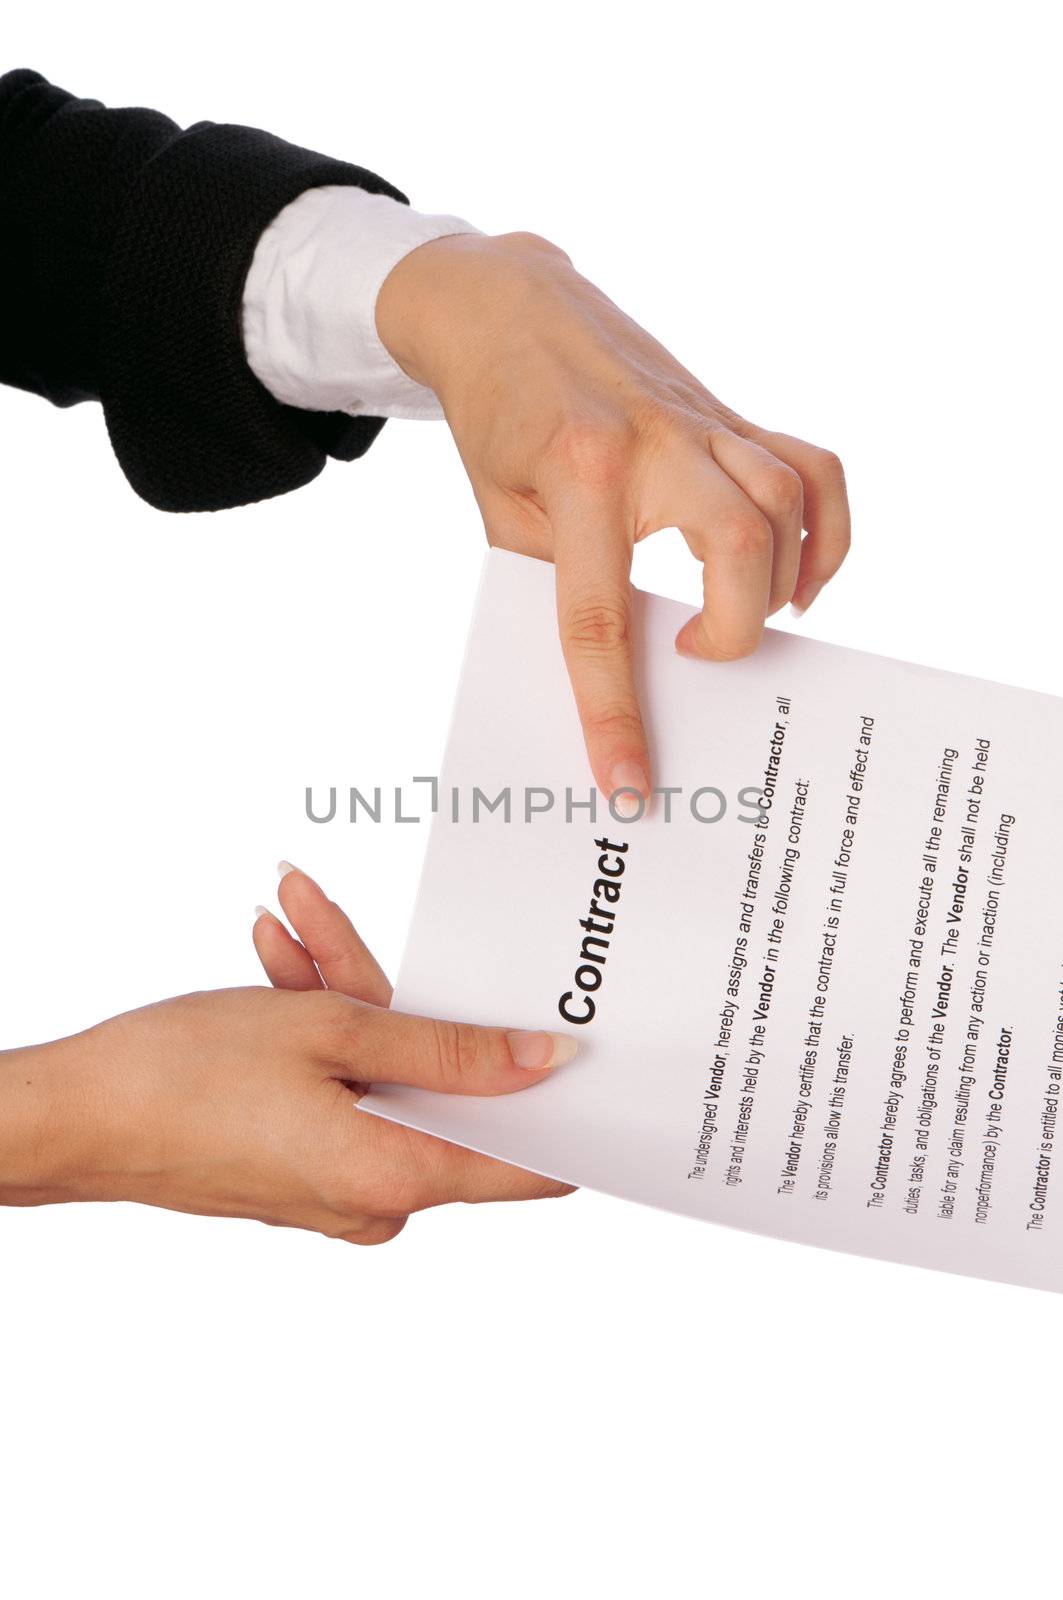 The new worker holds the contract in the hands